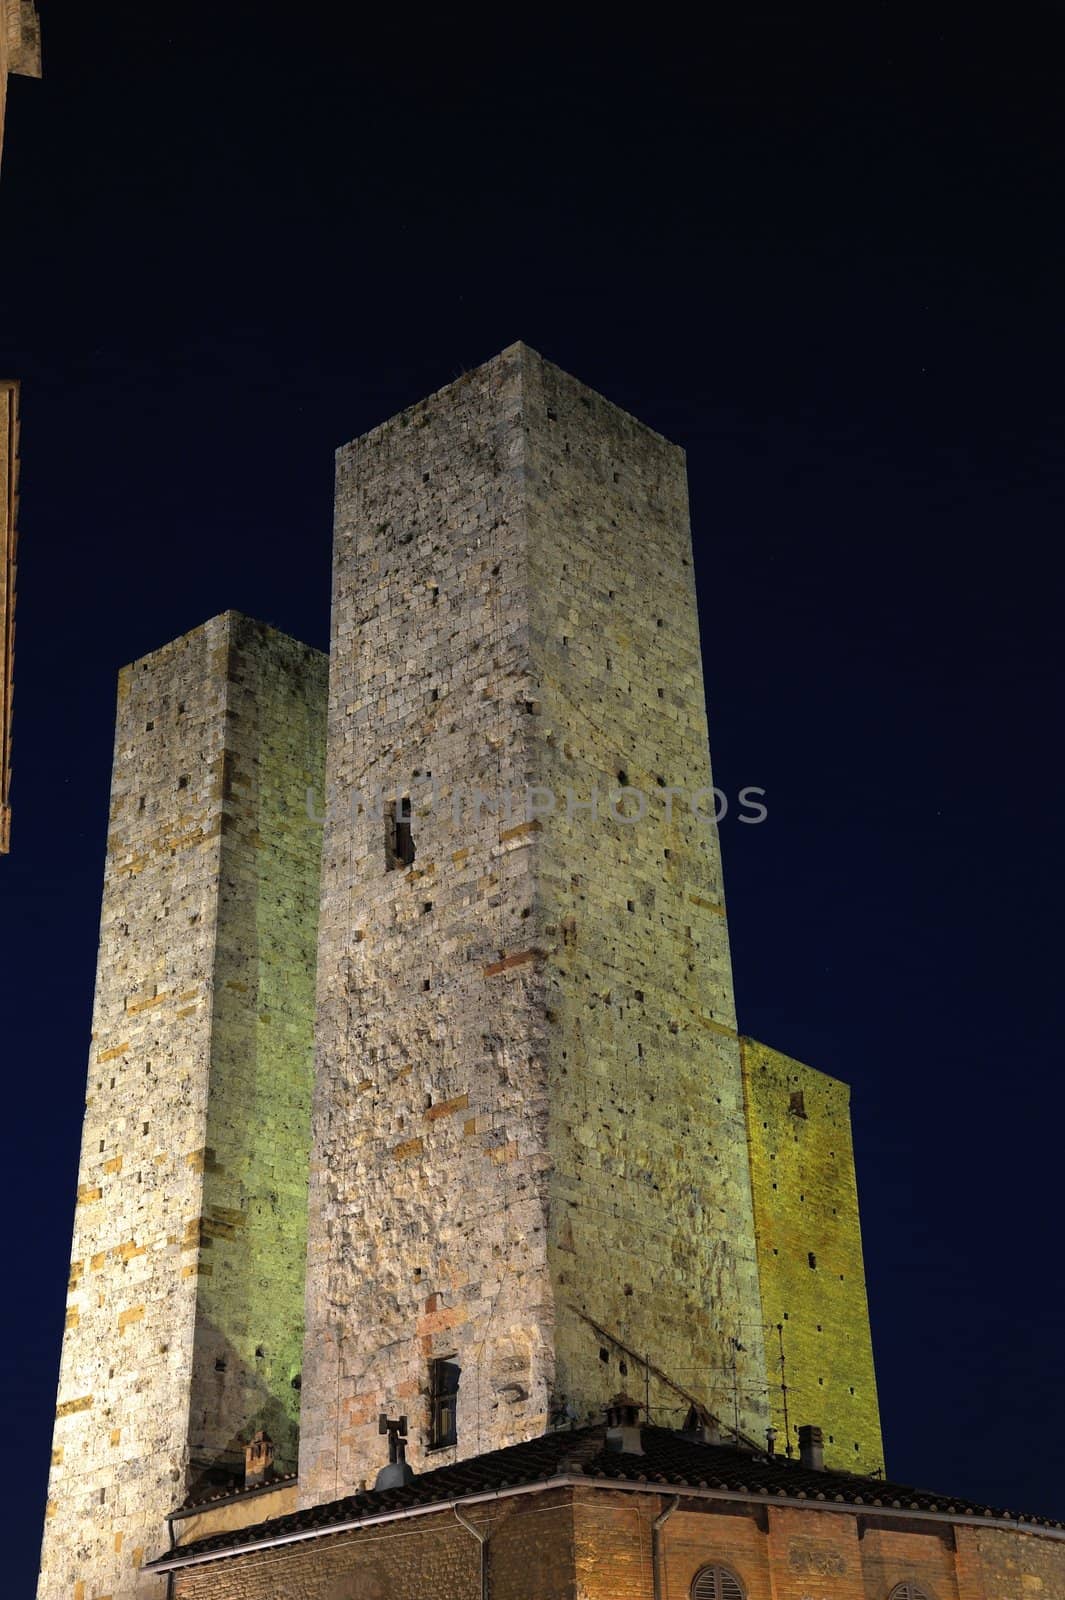 San Gimignano is a jewel of the tuscan medieval architecture